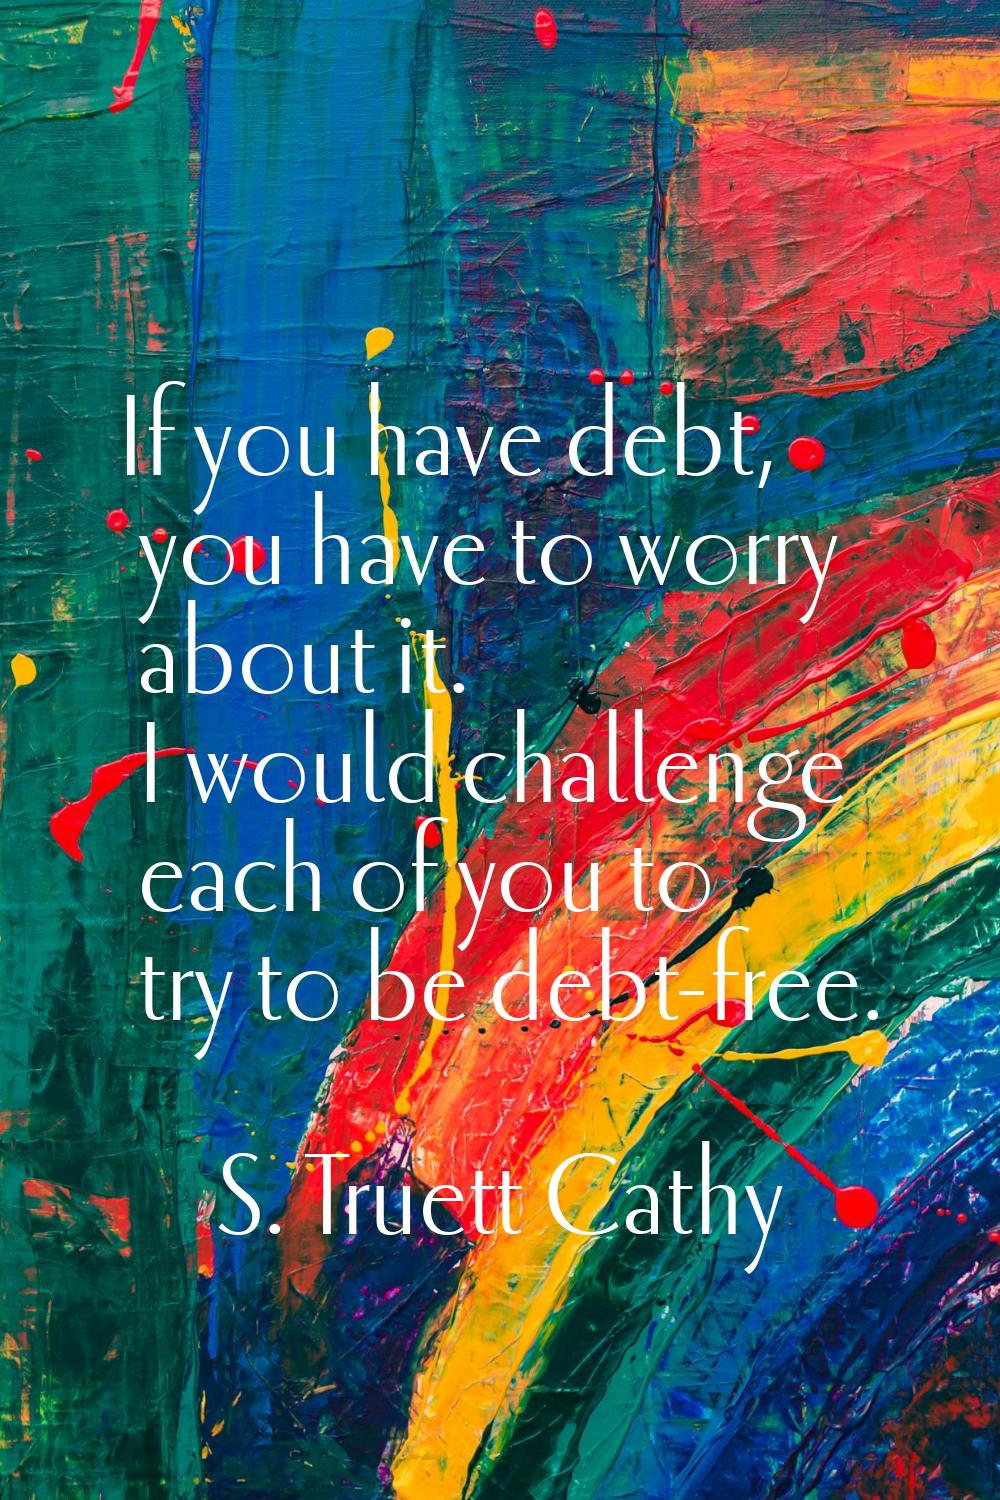 If you have debt, you have to worry about it. I would challenge each of you to try to be debt-free.